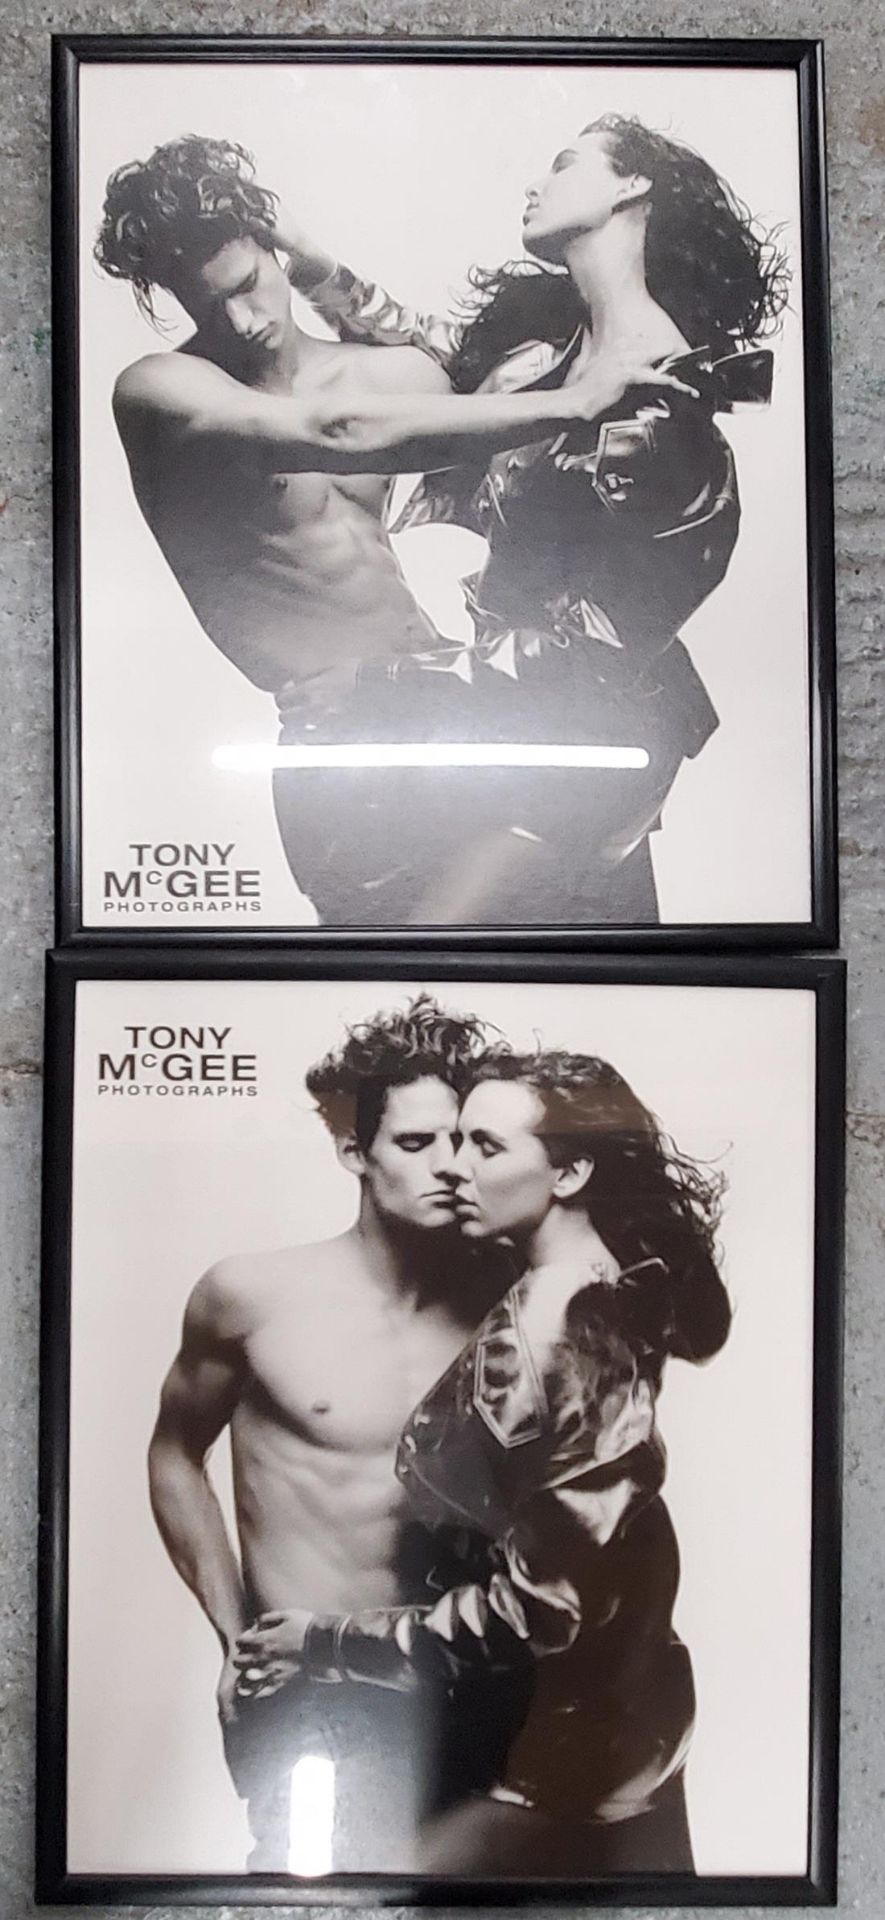 A PAIR OF TONY MCGEE LARGE EROTICA PHOTOGRAPH PRINTS